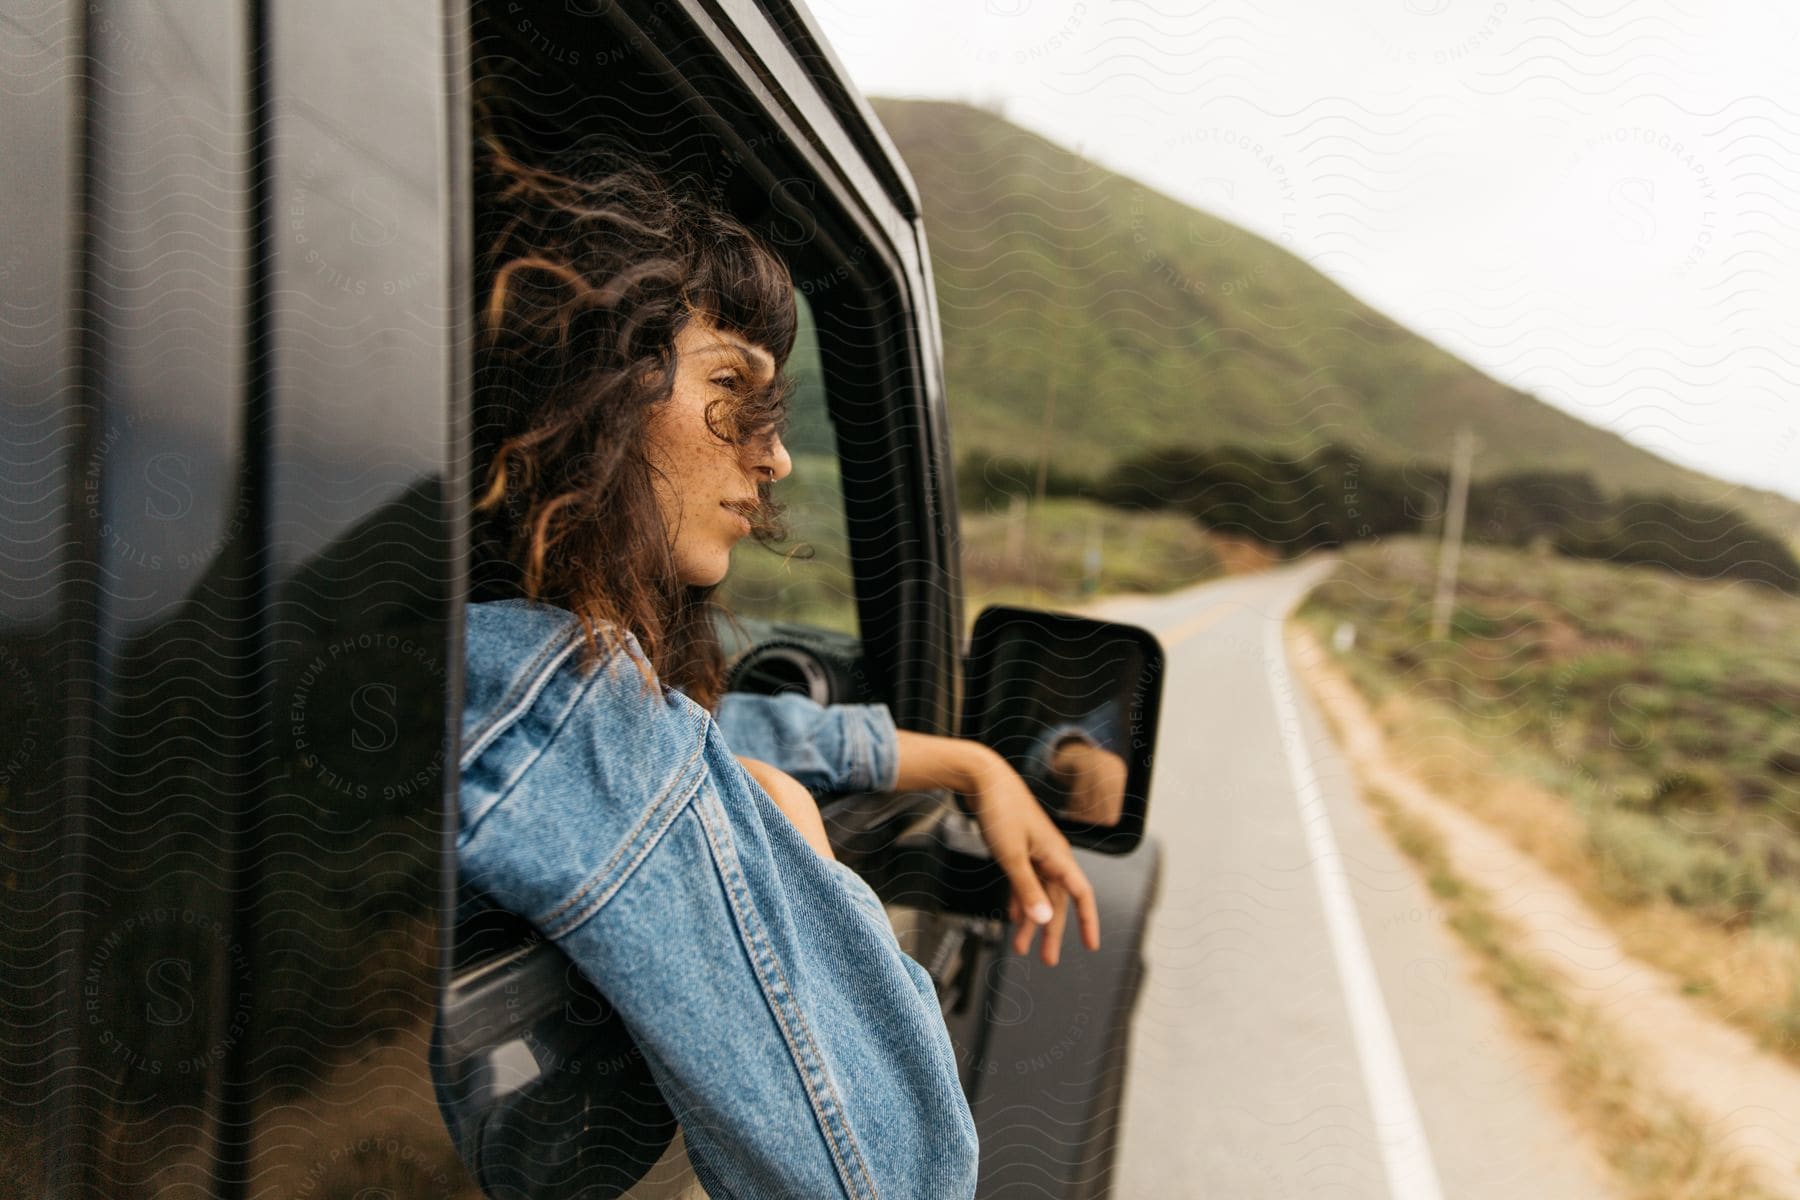 A woman leans out of the passenger window of a truck traveling near a mountain